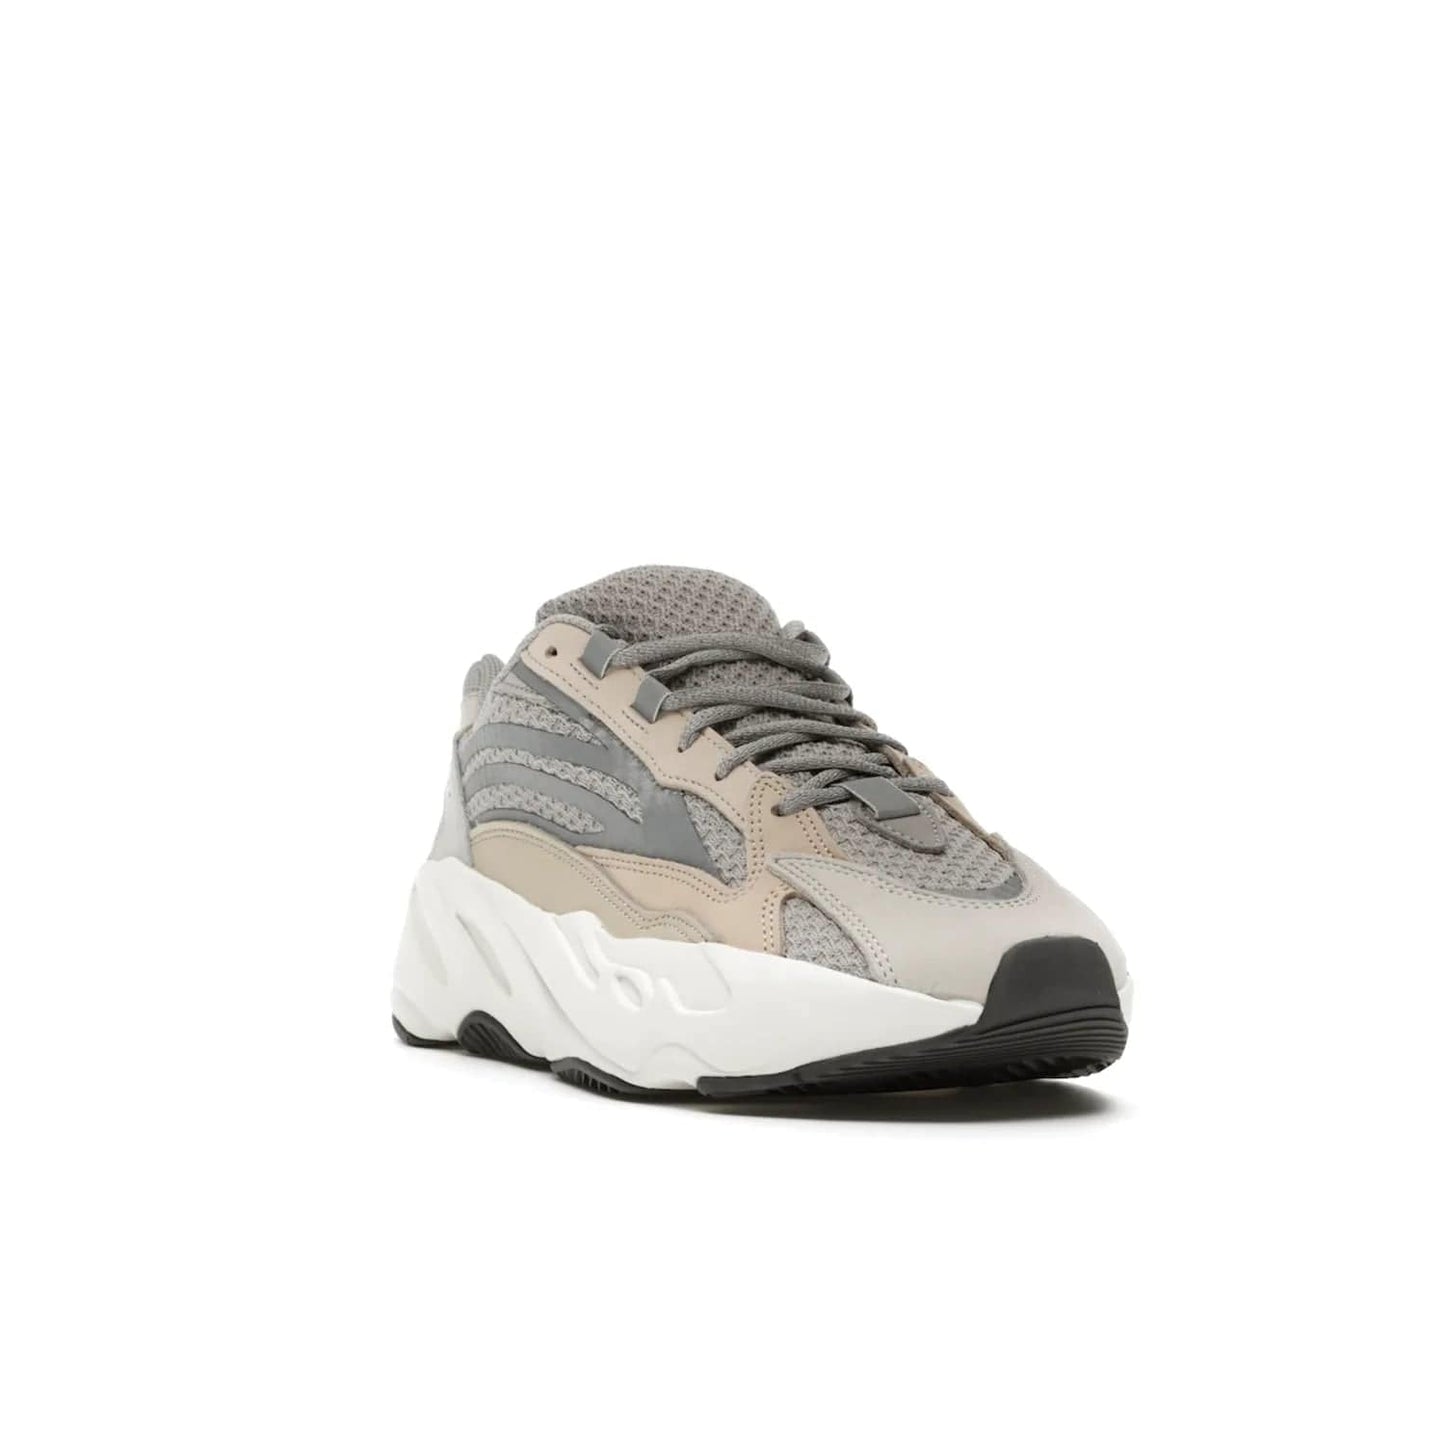 adidas Yeezy Boost 700 V2 Cream - Image 7 - Only at www.BallersClubKickz.com - Add style and luxury to your wardrobe with the adidas Yeezy 700 V2 Cream. Featuring a unique reflective upper, leather overlays, mesh underlays and the signature BOOST midsole, this silhouette is perfect for any stylish wardrobe.